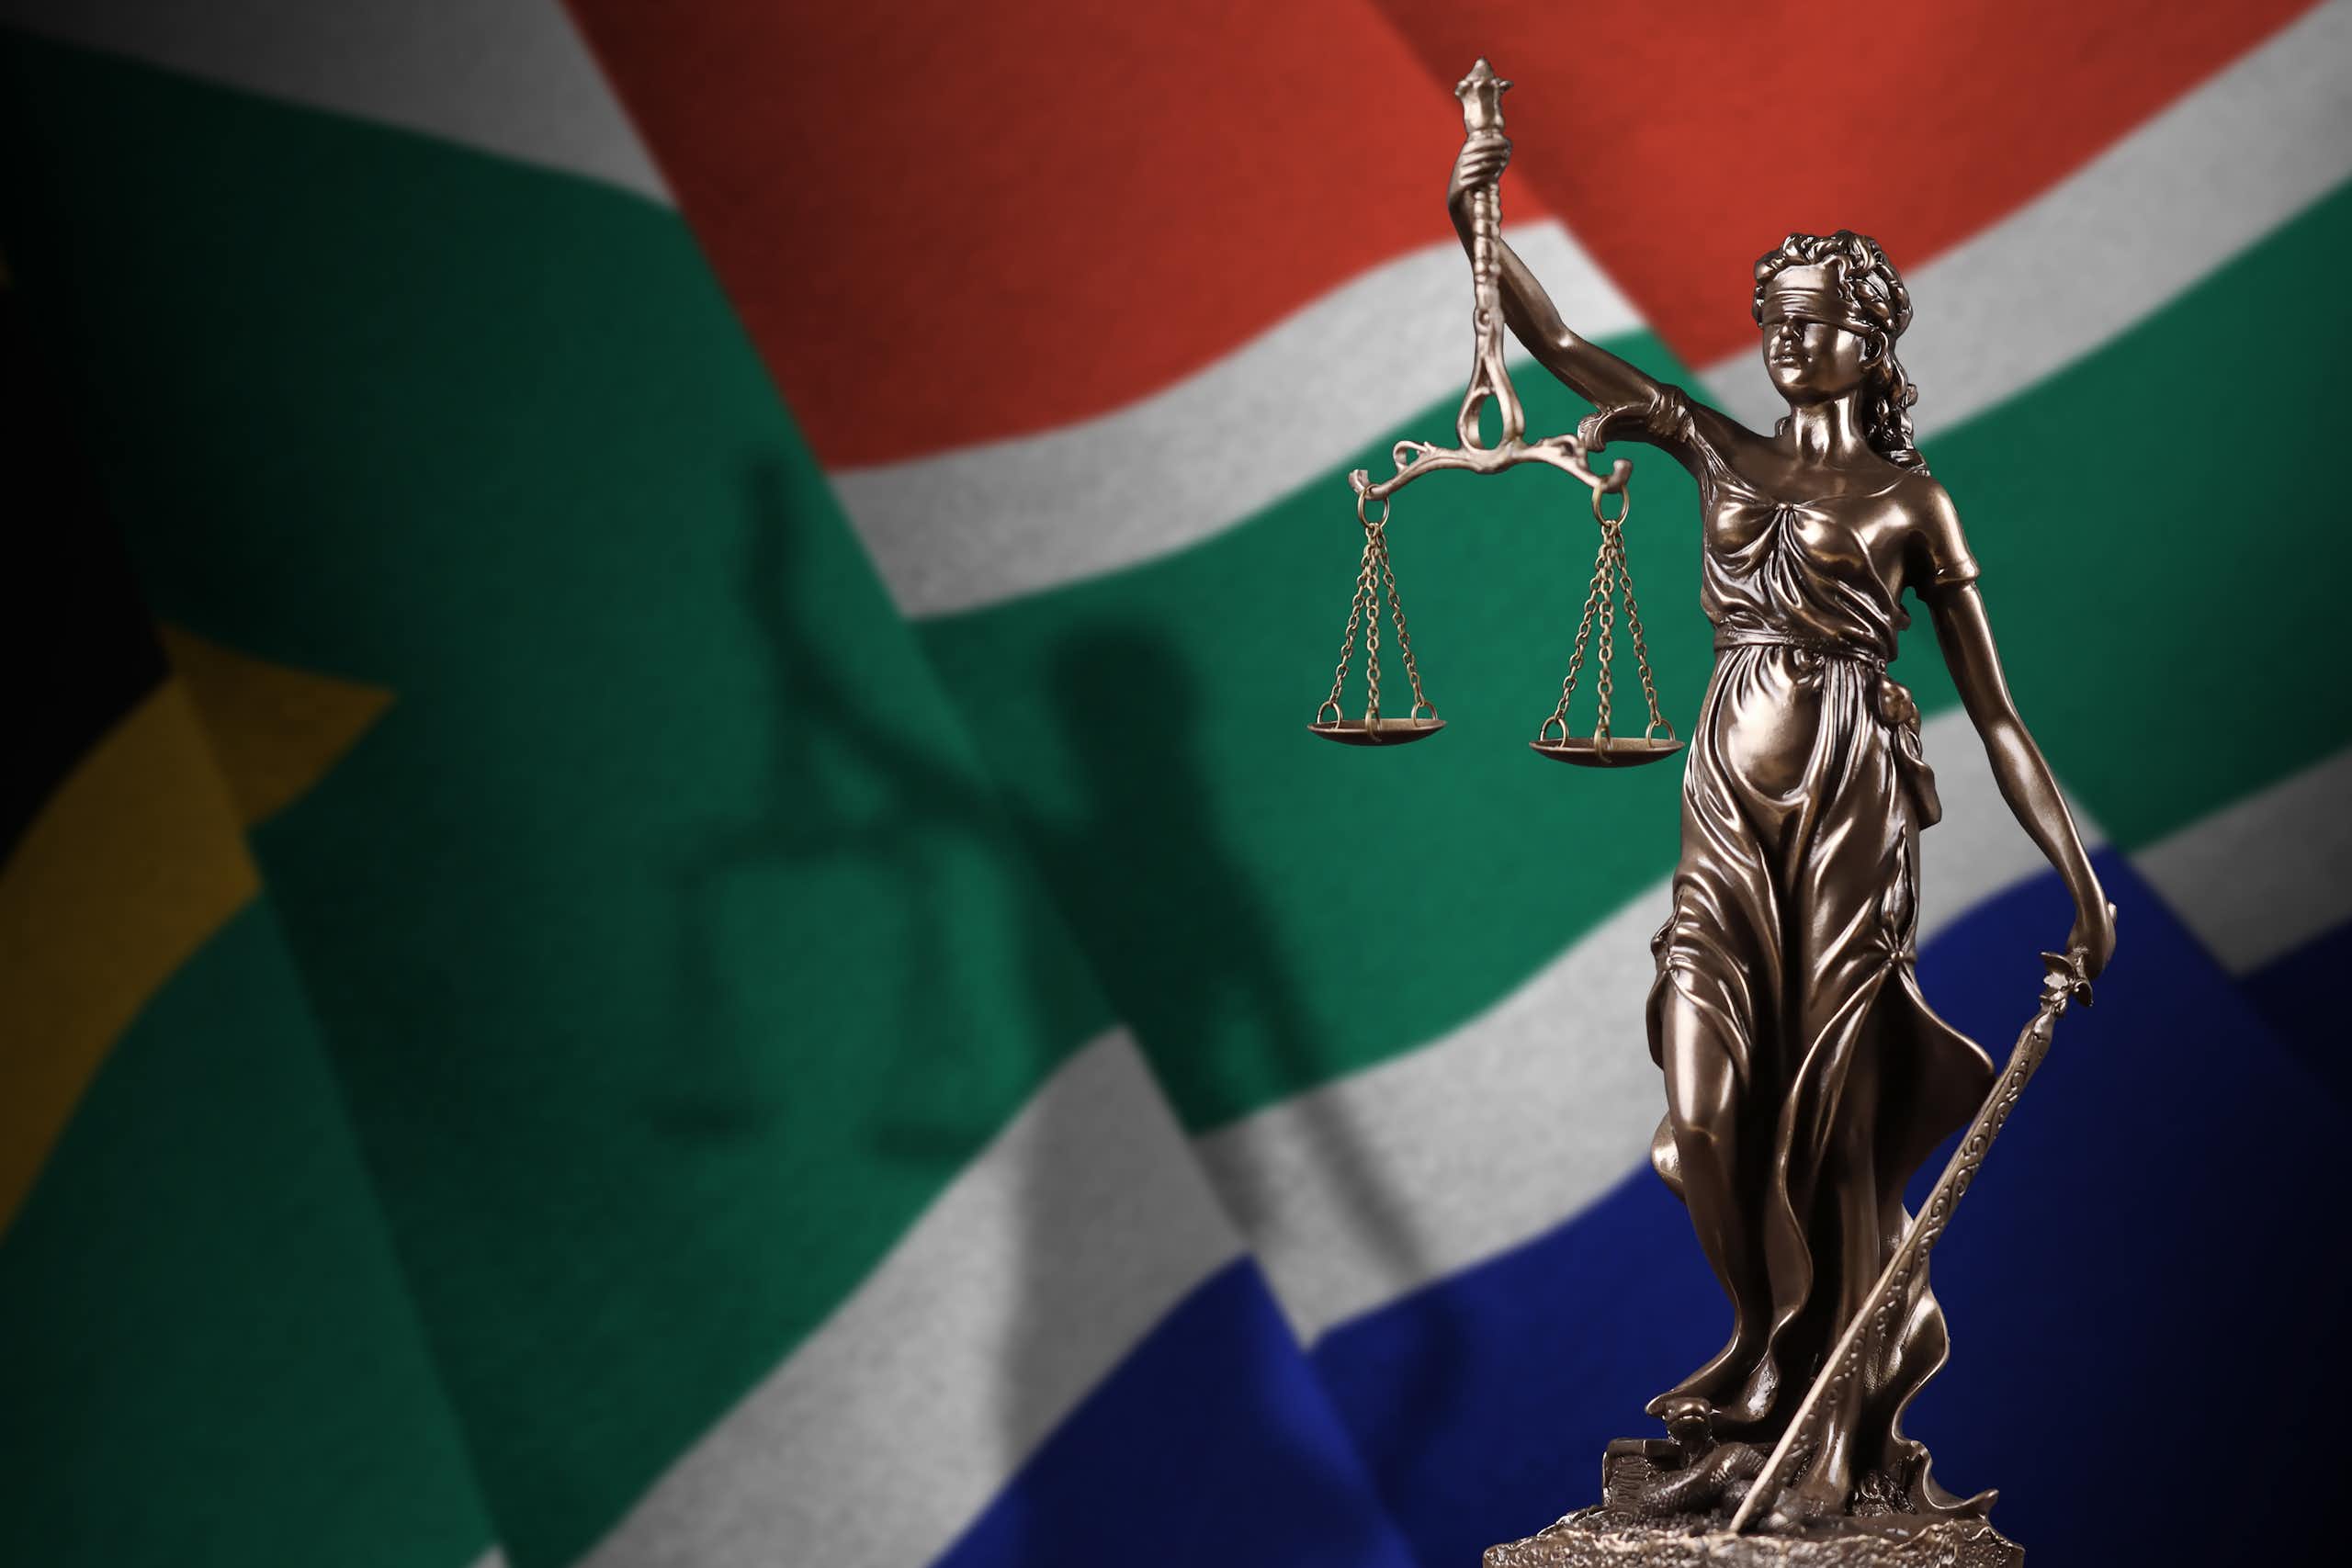 Lady Justice figurine superimposed over the South African flag.